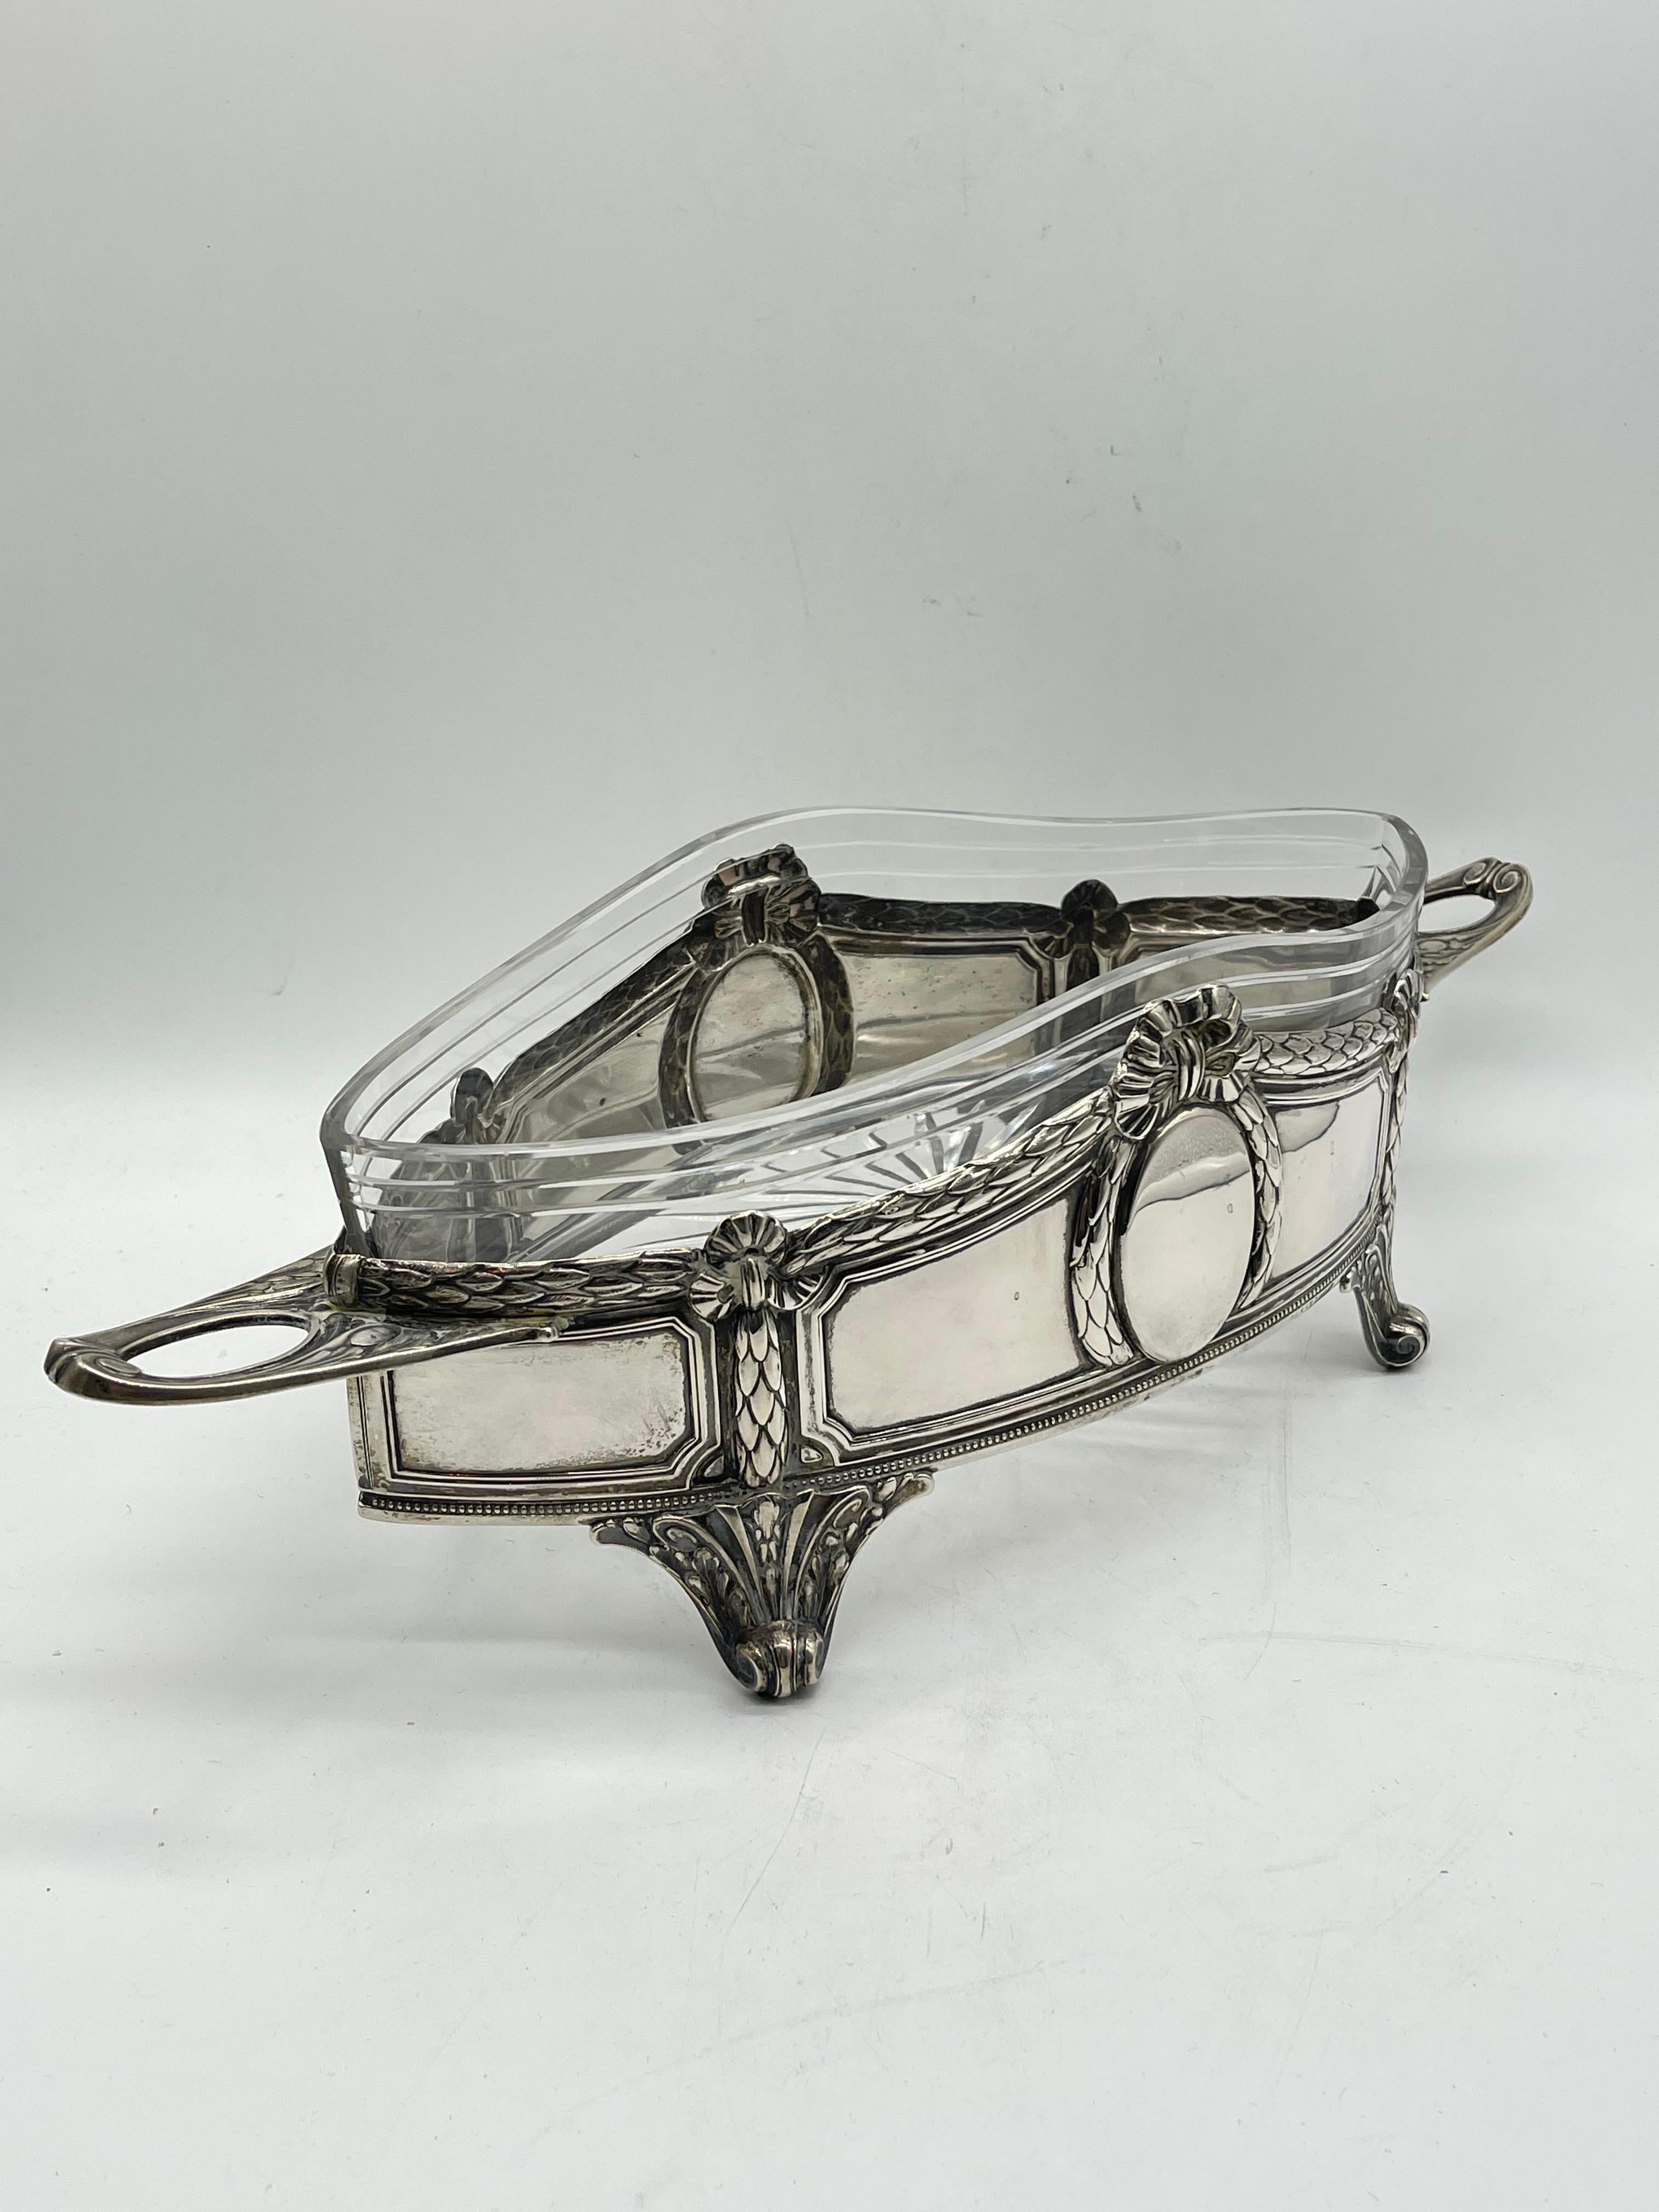 Antique Jardiniere / Planter with Glass insert Neoclassicism

Half moon & crown - Germany

Weight without Glass: 476 grams 

Condition can be seen in pictures